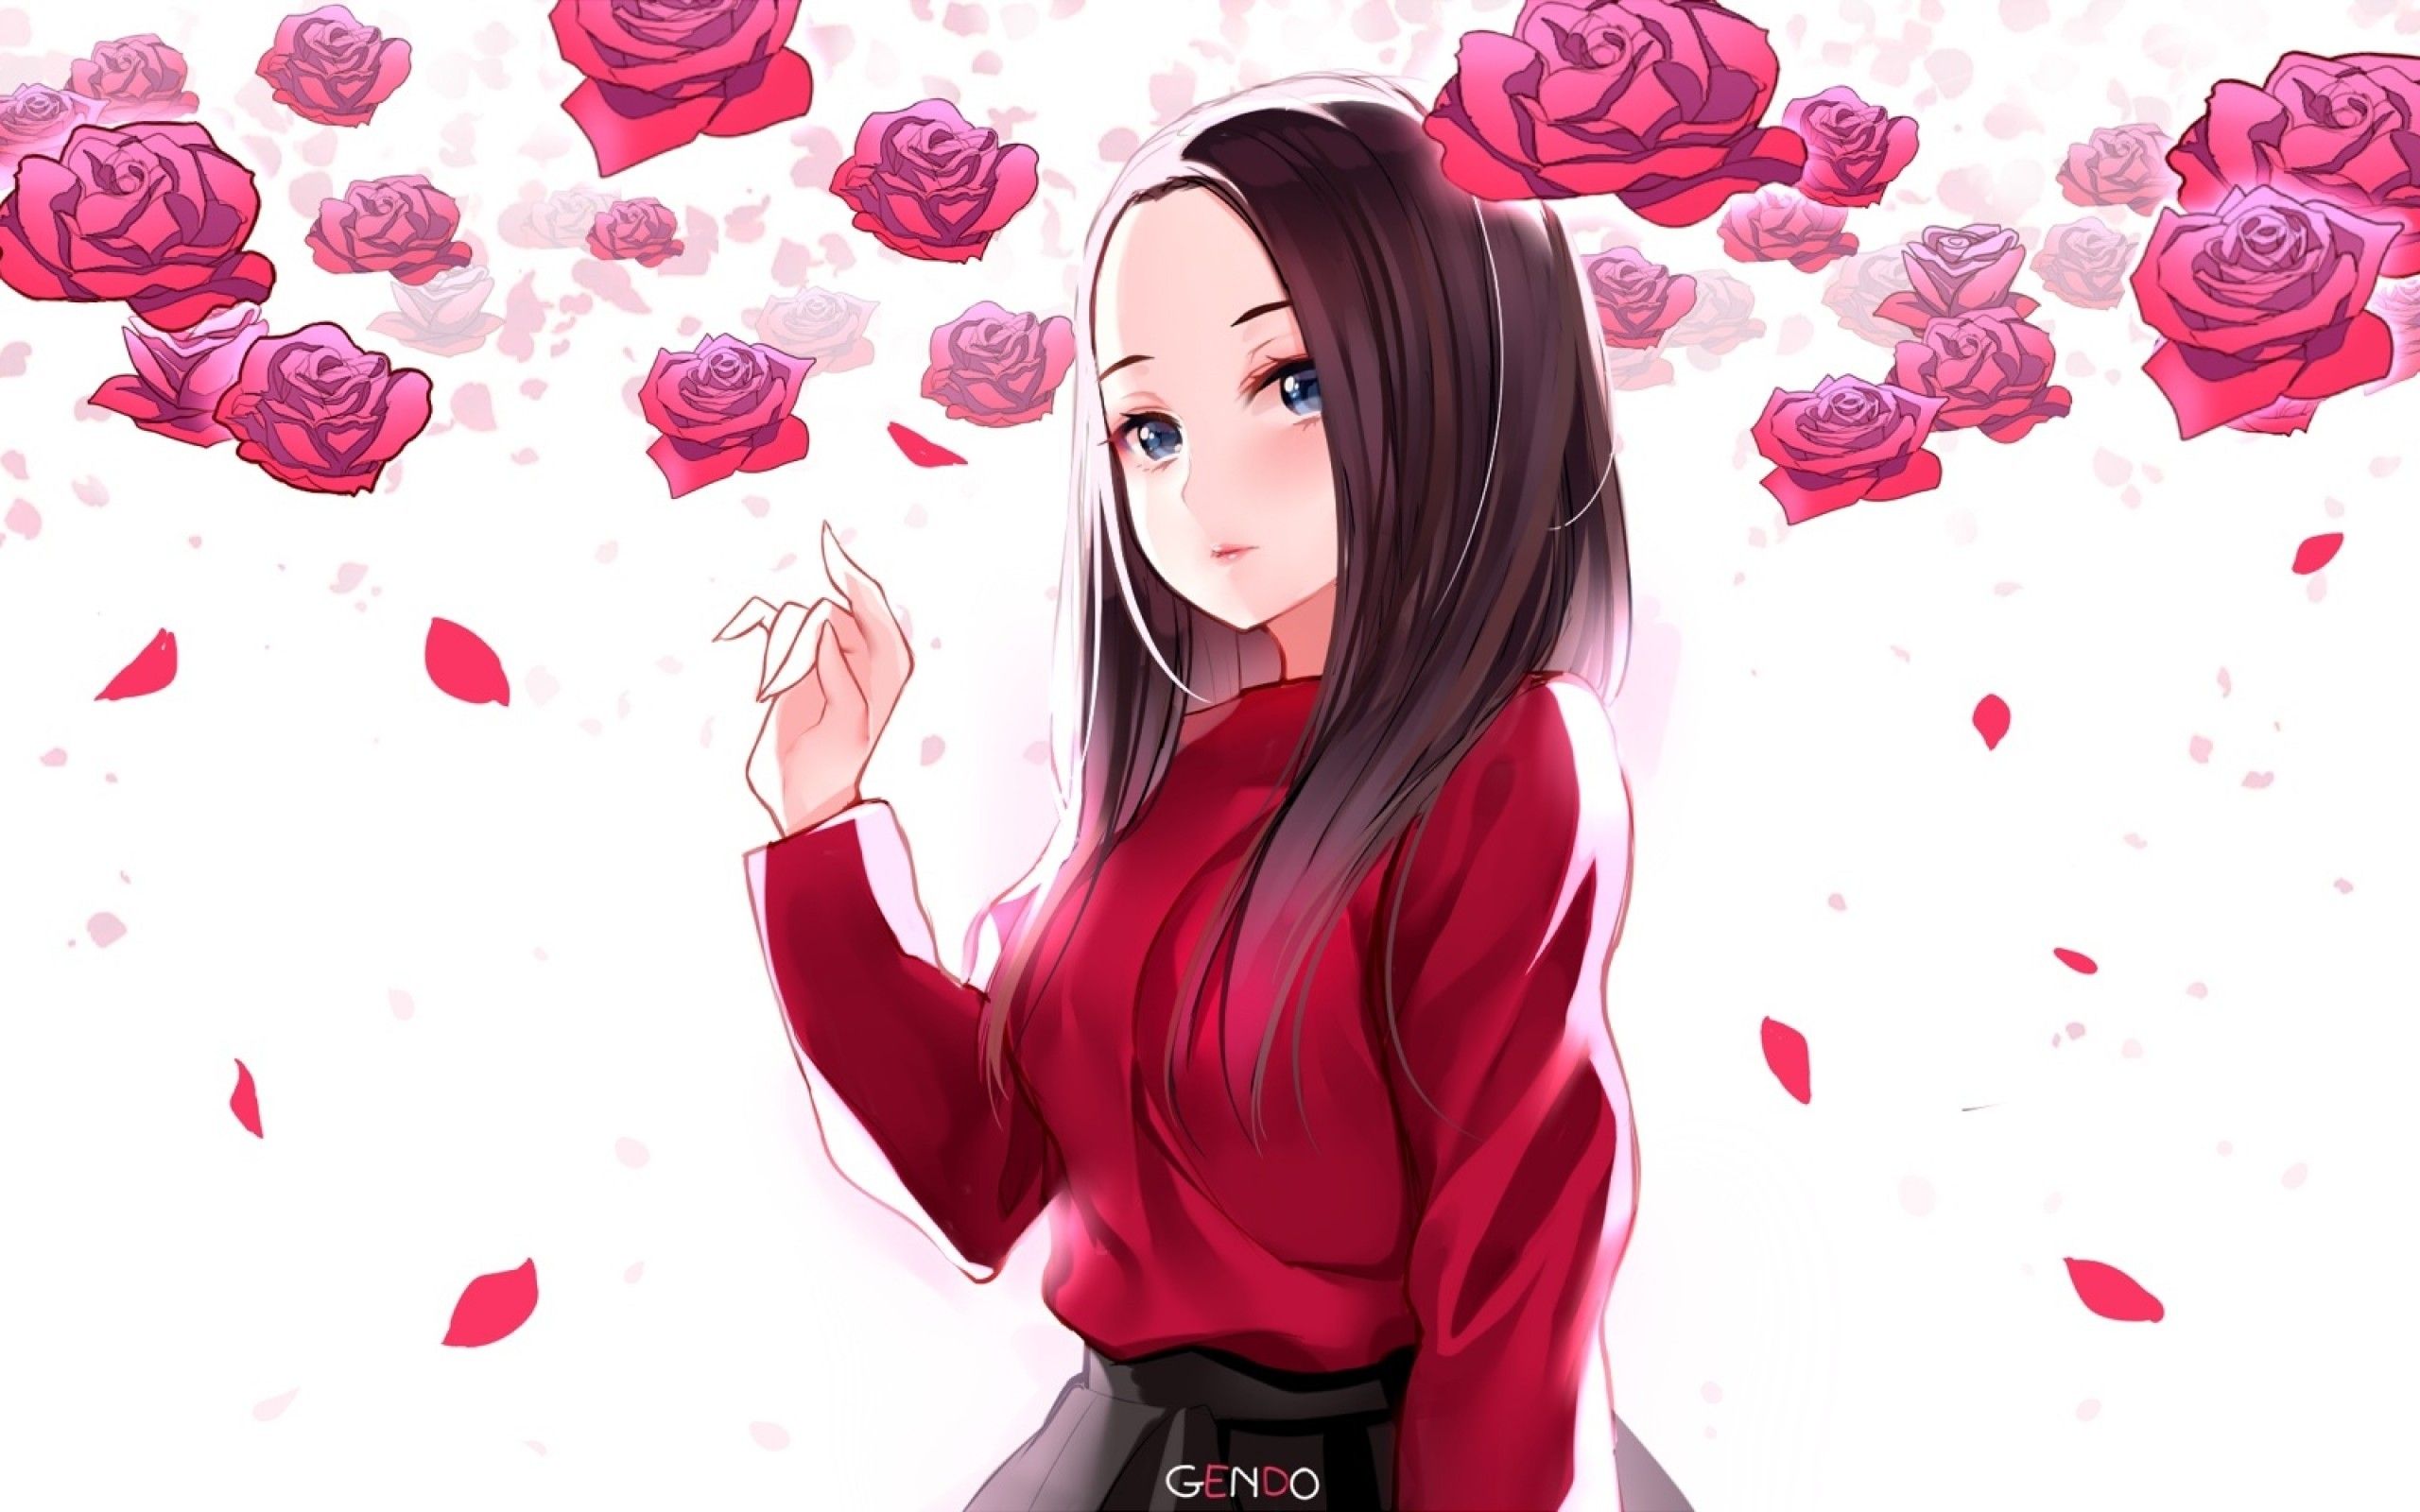 Cute Anime Girl With Rose Wallpaper Download | MobCup